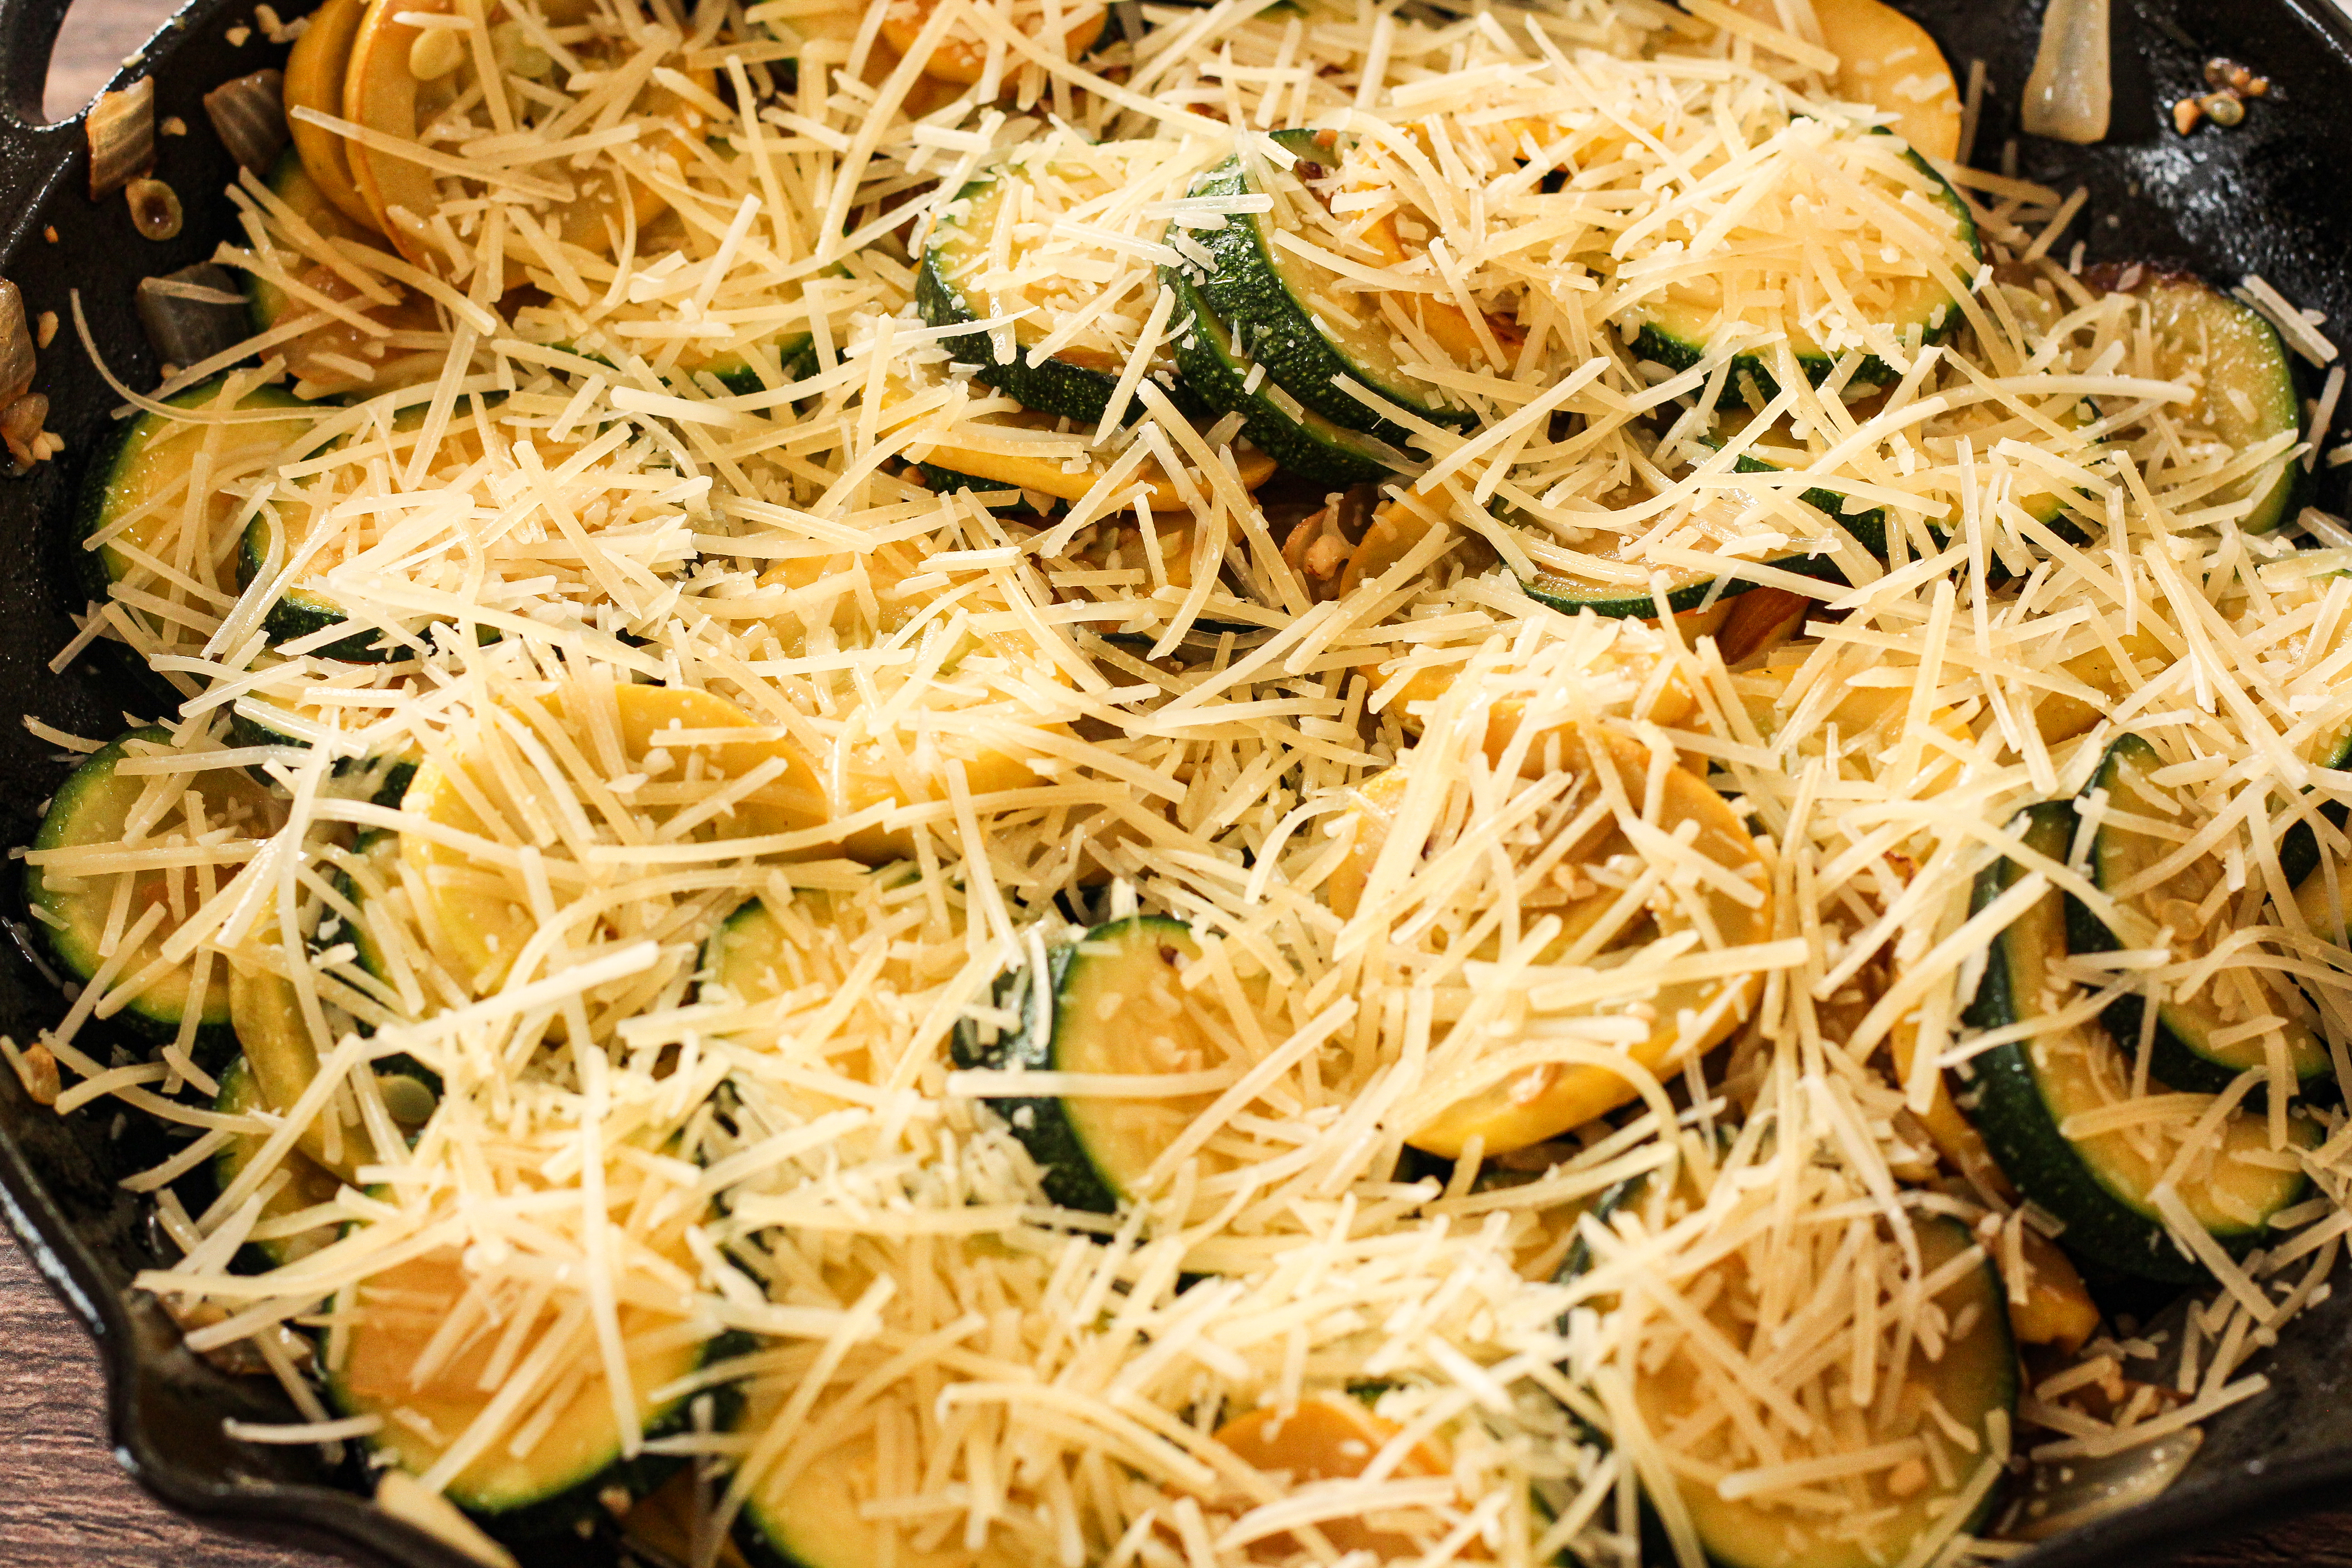 sauteed zucchini and yellow squash topped with parmesan cheese